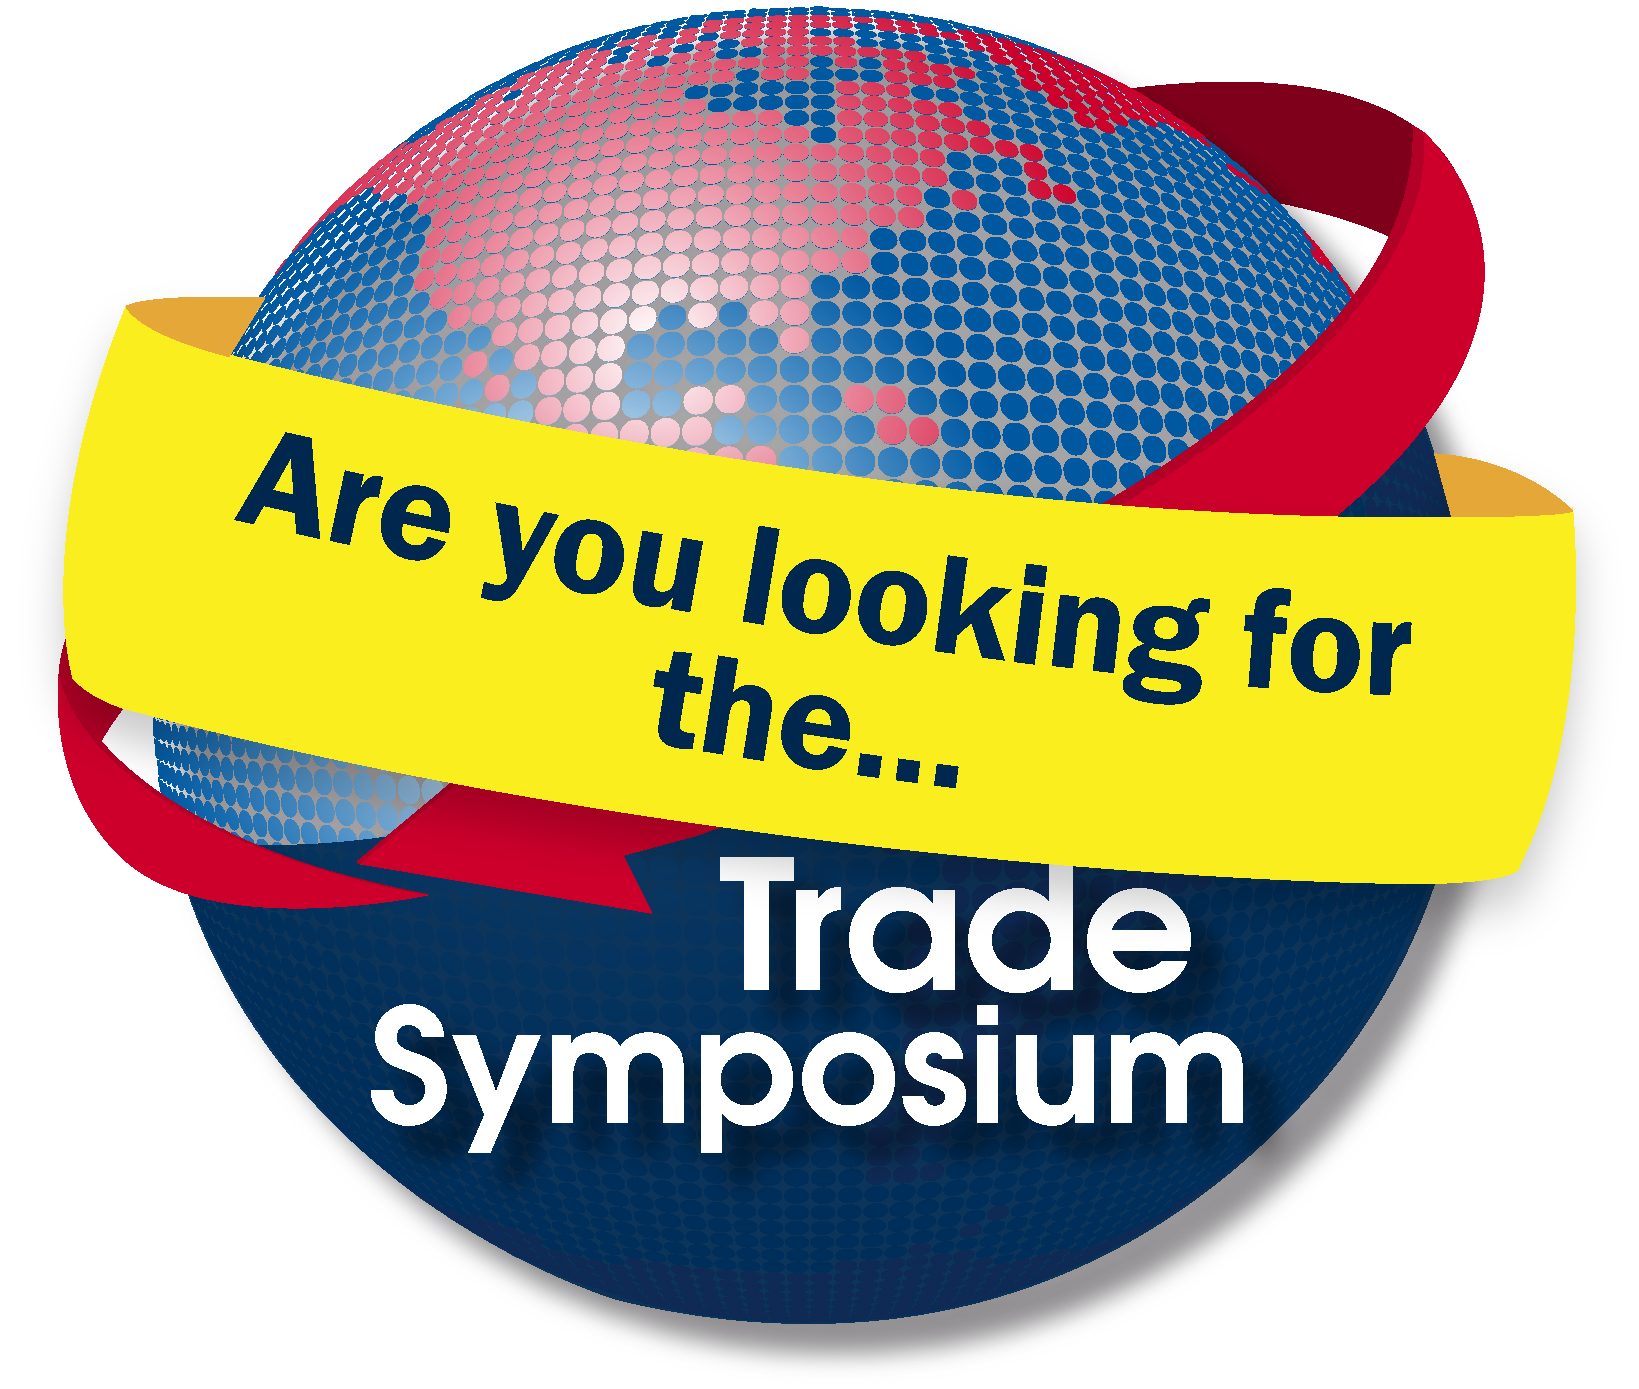 U.S. Customs and Border Protection’s (CBP) Trade Symposium and Customs Trade Partnership Against Terrorism (CTPAT) Conference will be a combined event: 2022 Trade Facilitation and Cargo Security Summit to be held on July 18-20 in Anaheim, CA Registration opening announcement with globe and yellow ribbon going around the globe.